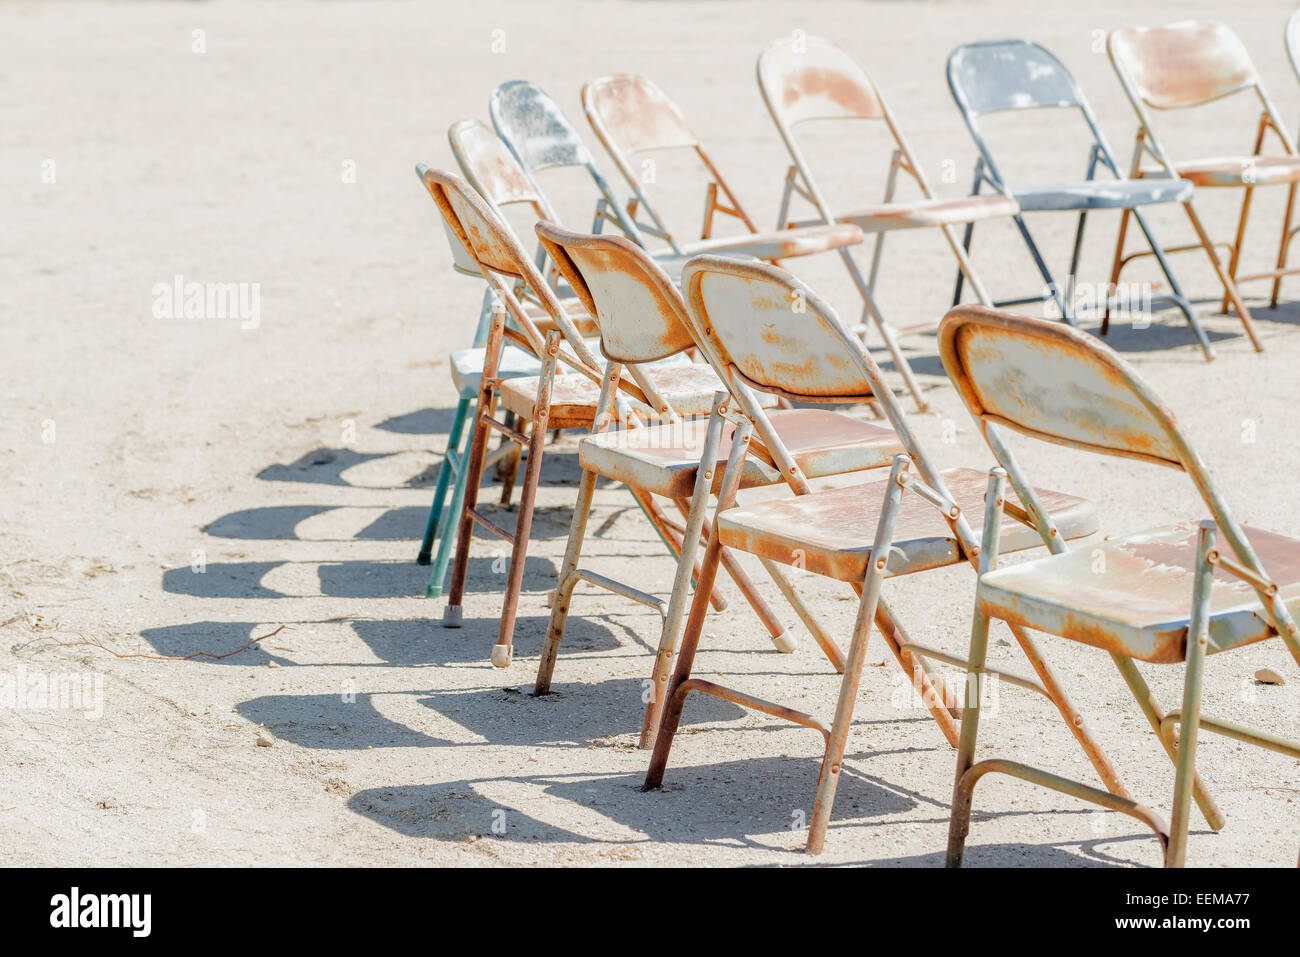 Dilapidated chairs arranged in circle in dirt field Stock Photo